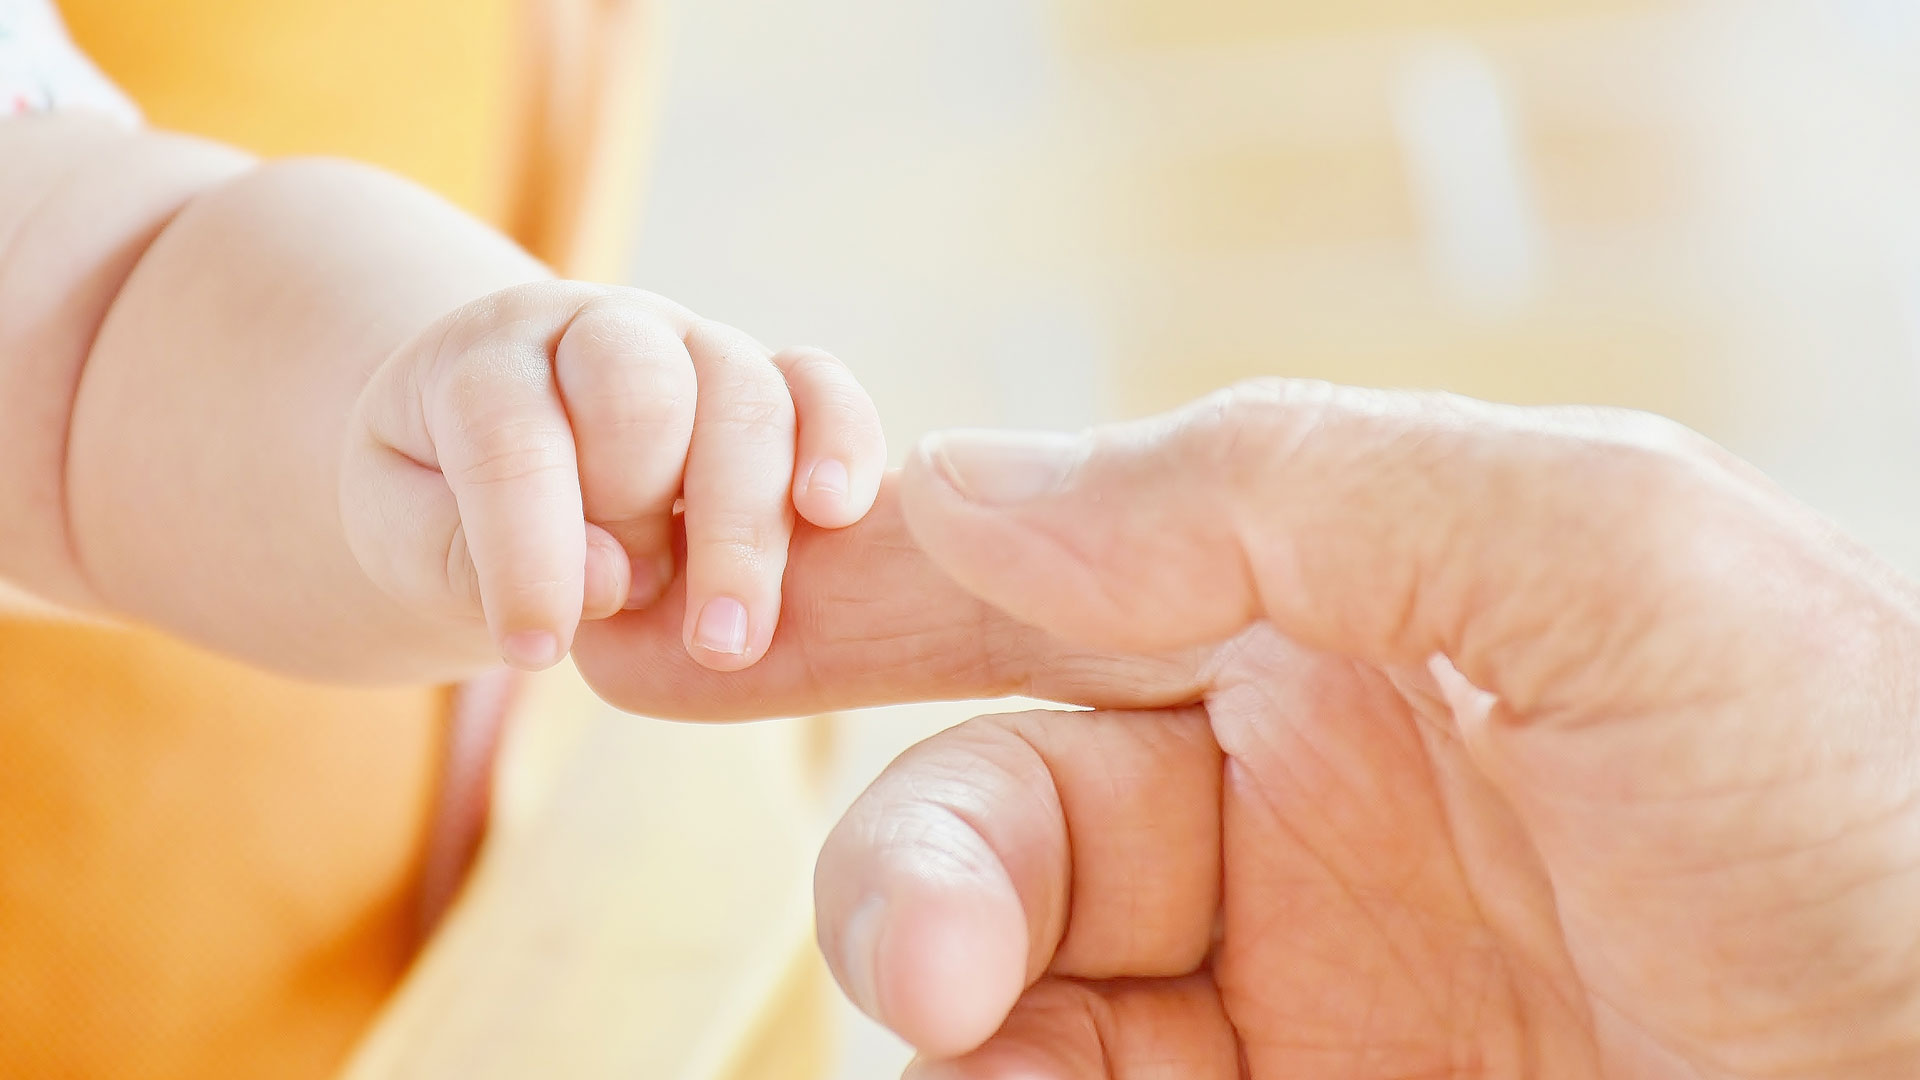 A baby's hand gripping an adult finger,